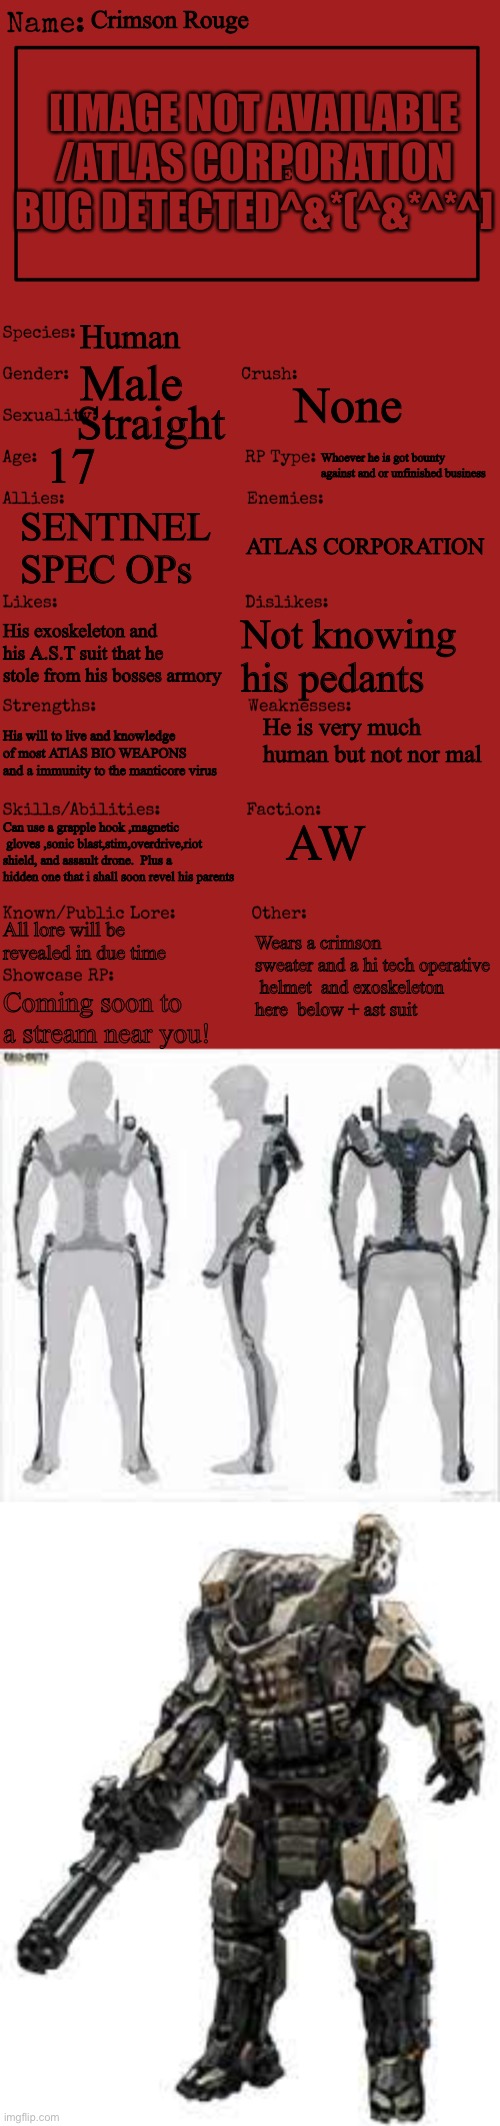 AW tied to my other OCs | Crimson Rouge; [IMAGE NOT AVAILABLE /ATLAS CORPORATION BUG DETECTED^&*(^&*^*^]; Human; Male; None; Straight; 17; Whoever he is got bounty against and or unfinished business; SENTINEL SPEC OPs; ATLAS CORPORATION; Not knowing his pedants; His exoskeleton and his A.S.T suit that he stole from his bosses armory; He is very much human but not nor mal; His will to live and knowledge of most ATlAS BIO WEAPONS  and a immunity to the manticore virus; AW; Can use a grapple hook ,magnetic  gloves ,sonic blast,stim,overdrive,riot shield, and assault drone.  Plus a hidden one that i shall soon revel his parents; Wears a crimson sweater and a hi tech operative  helmet  and exoskeleton here  below + ast suit; All lore will be revealed in due time; Coming soon to a stream near you! | image tagged in new oc showcase for rp stream | made w/ Imgflip meme maker